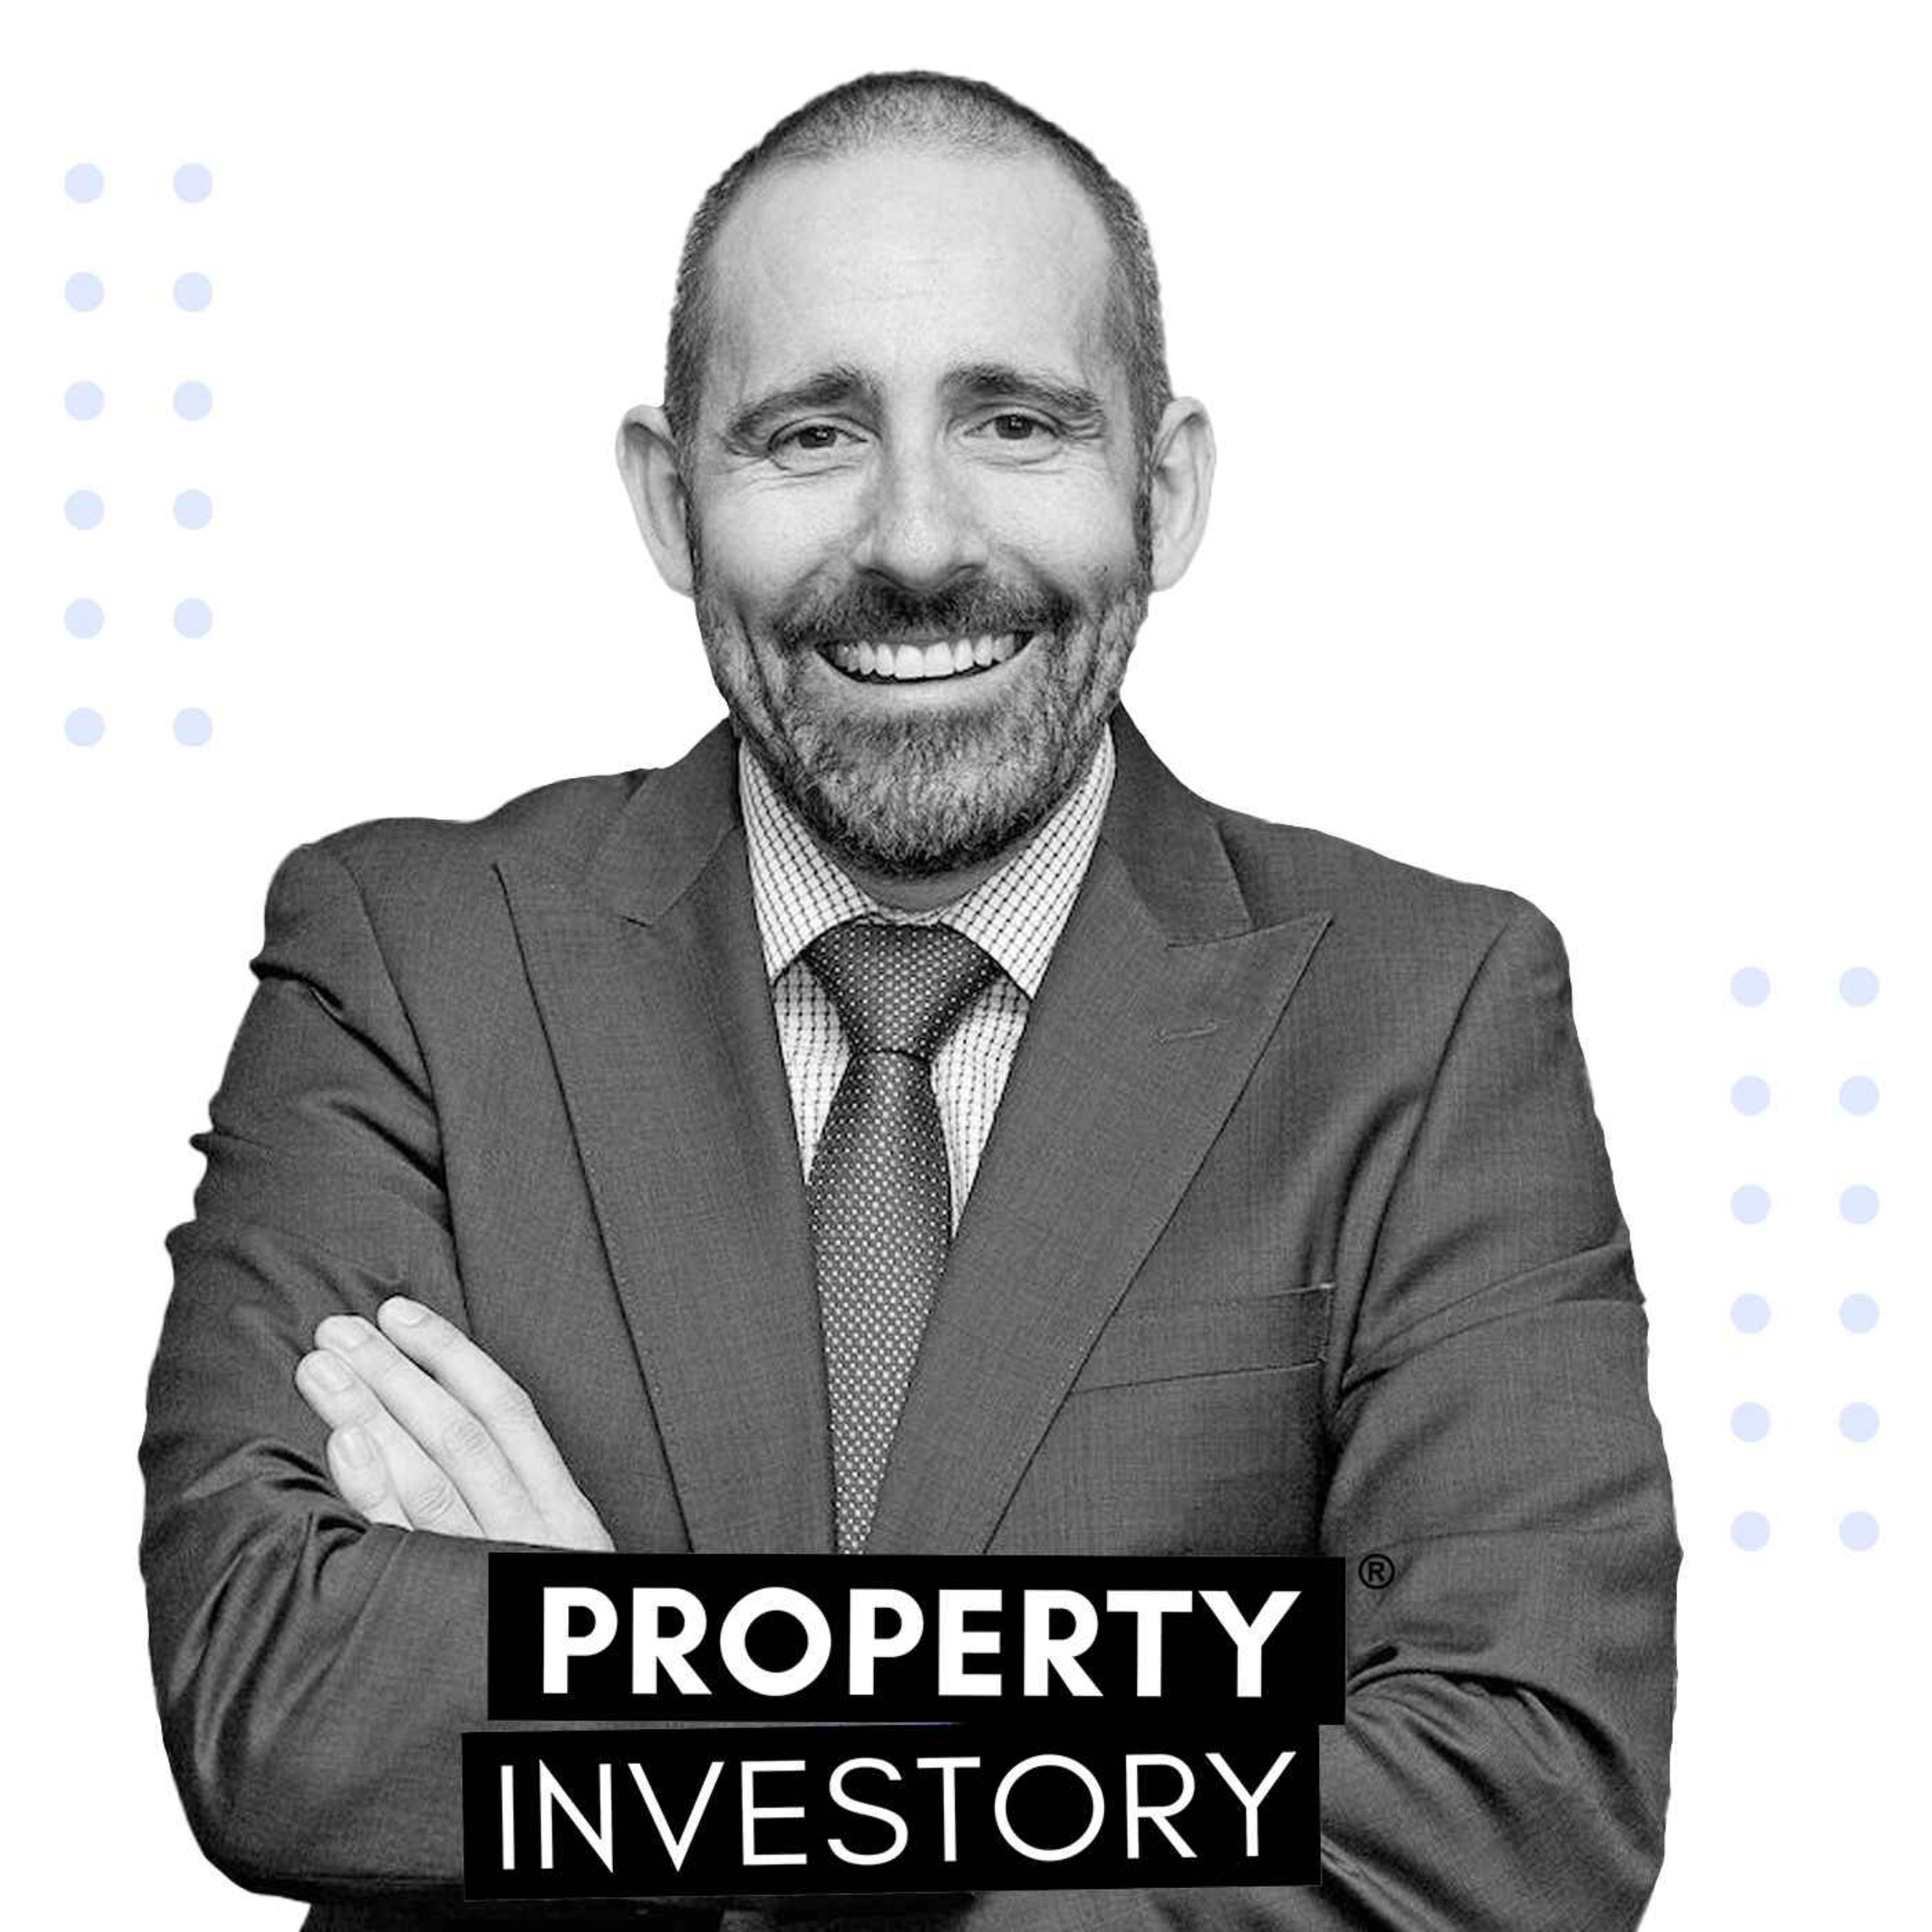 From the 1990s to Now: Frank Raiti’s Exciting Property Journey